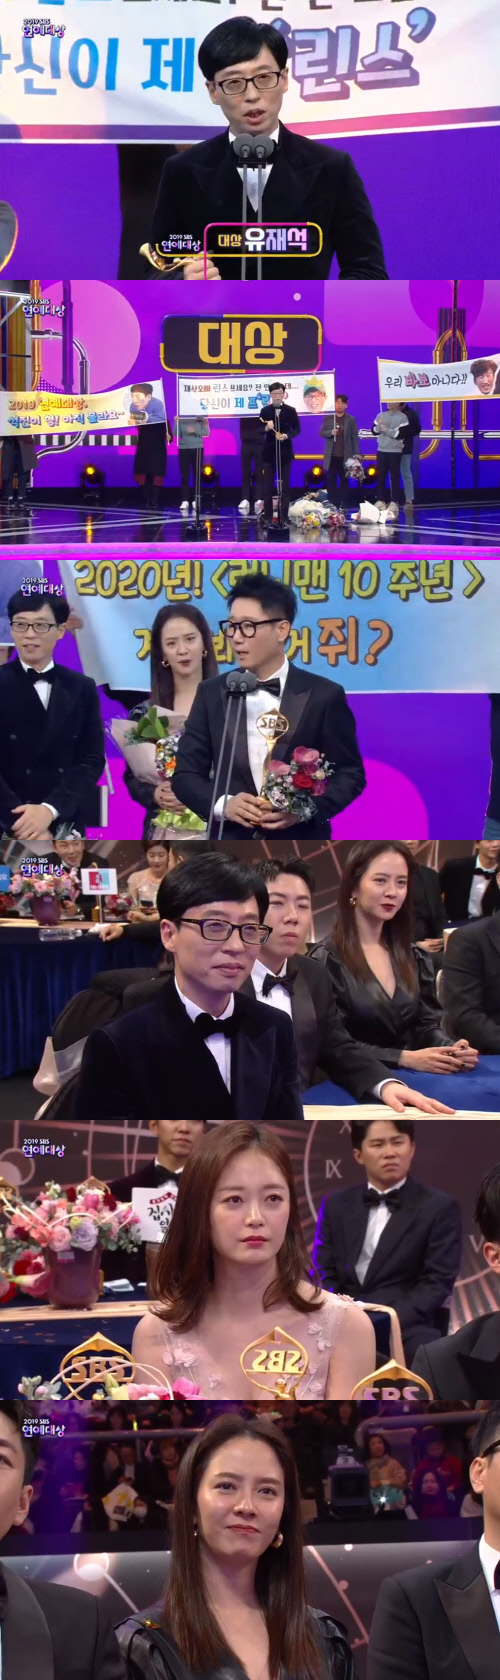 Yoo Jae-Suk left a lot of luck with his sincere award testimony at the SBS Entertainment Awards.The SBS Entertainment Awards were held at SBS Prism Tower in Sangam-dong, Seoul on the 28th. The title of the trophy of the year was Yoo Jae-Suk of Running Man.Running Man is a representative SBS entertainment show that has been on air since 2010, and is gaining popularity in Asian countries such as Vietnam, Hong Kong and Malaysia.Yoo Jae-Suk has been a strong centerpiece of Running Man and has been popular for 9 years.Yoo Jae-Suk enjoyed the awards ceremony with his usual bright expression, especially when Running Man was crowned sixth.However, when his name was called as the grand prize winner, he continued his feelings.Yoo Jae-Suk expressed gratitude to viewers, Running Man members and family, saying, I am too much for you.Variety is losing a lot of place in entertainment these days, and I thank you to the many crews and guests who have made my way.Next year is the 10th anniversary of Running Man. I will try to make progress.Yoo Jae-Suk also mentioned Sulli and Goo Hara, who had previously appeared as Running Man guests. He said, Sulli, Goo Hara, I think a lot.I hope youll be comfortable doing what you want to do. Thank you to you both.The members of Running Man who looked at it were also sad again.Yoo Jae-Suk said, If you used to think about Is there anything fun in the past, I think you are in ordinary and comfortable everyday life these days.Thank you to those who make my day and year with sweat and effort that let me spend my precious daily life.I hope you will be happy for the new year. This year, Yoo Jae-Suks SBS Entertainment Grand Prize was awarded for four years since 2015.As a top star who always keeps his top position, he was able to be pleased because he was a target after a long gap, but Yoo Jae-Suk was calm and calm and attracted attention.Especially, Sully and Goo Hara, who broke everyones heart this year, added Thank You greetings.The experience of feeling everyday is also important to many viewers.It was not the comedian Yoo Jae-Suk, but the human Yoo Jae-Suk was also a prize testimony that I could feel.Meanwhile, SBS Entertainment Awards were attended by stars who shined SBS this year, including Baek Jong-won, Seo Jang-hoon, Song Ji-hyo, Kim Hee-chul, Lee Yoon-ji, Kim Wan-sun and Kim Gura.MC was performed by Kim Sung-joo, Park Na-rae, and Cho Jung-sik announcers. The celebration performances were performed by group and Cheong-ha, SBS announcer Jang Ye-won, Joo Si-eun, Kim Soo-min, Kim Joo-woo and Kim Yoon-sang.The Burning Youth team was also joined.Photo  capture SBS broadcast screen